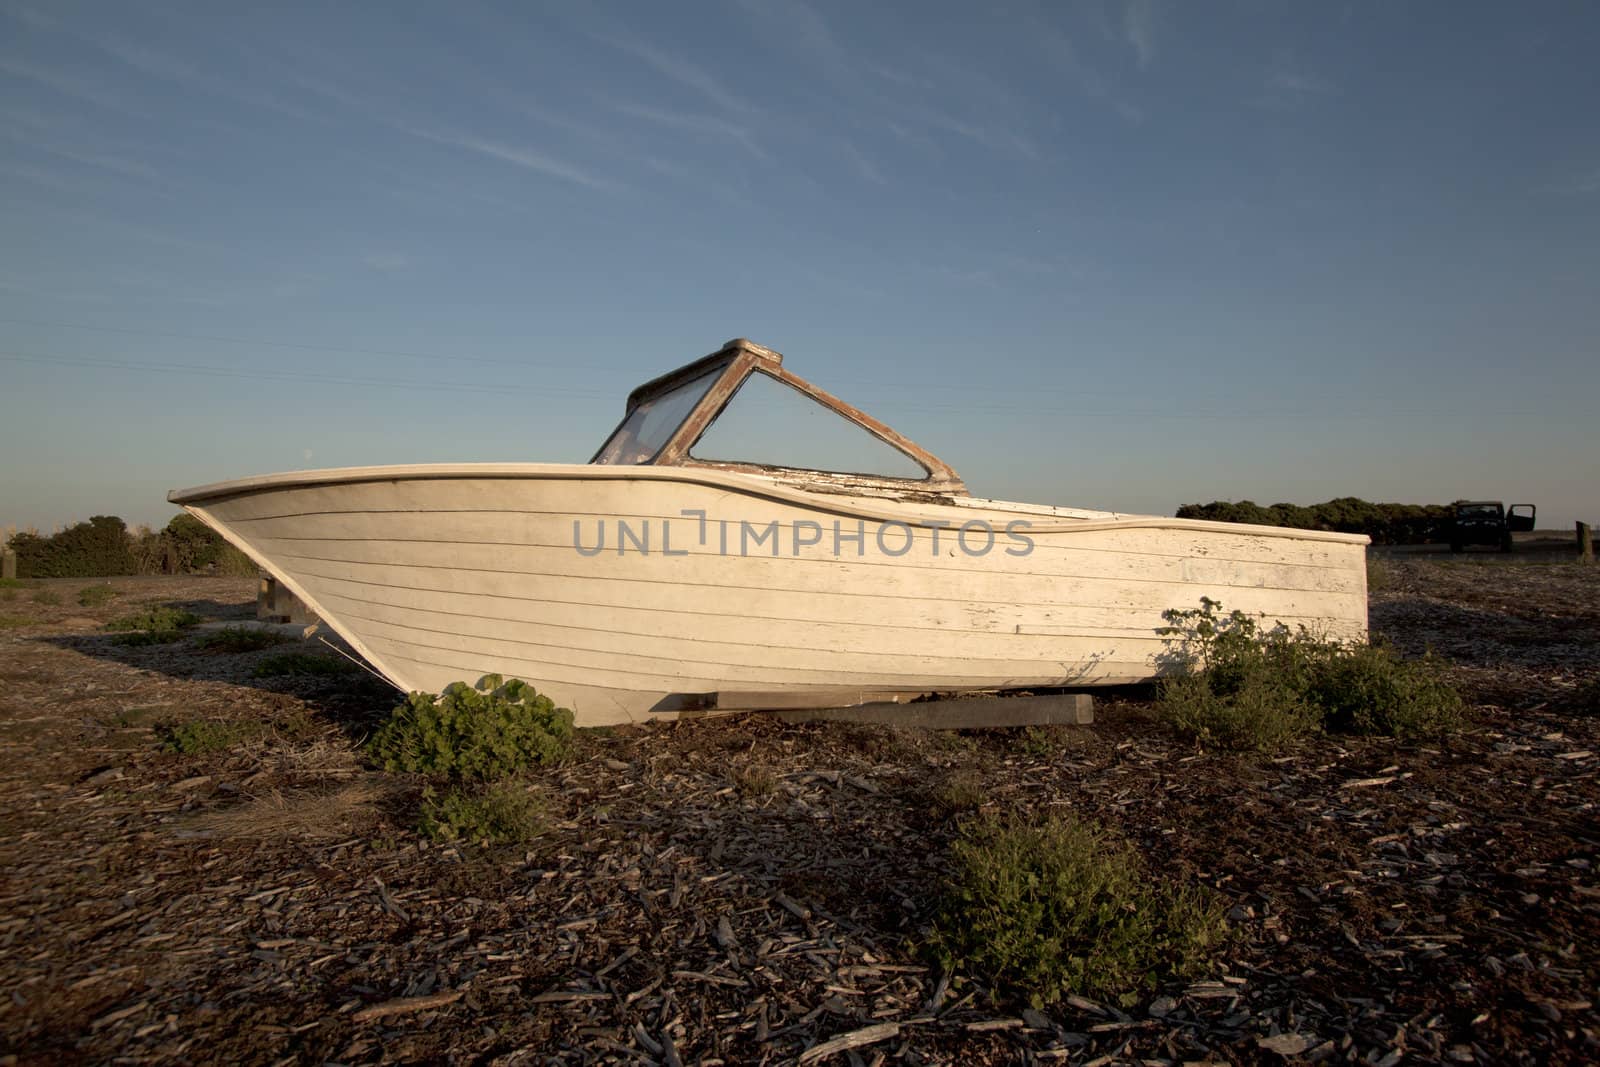 Wrecked boat on the beach by jeremywhat